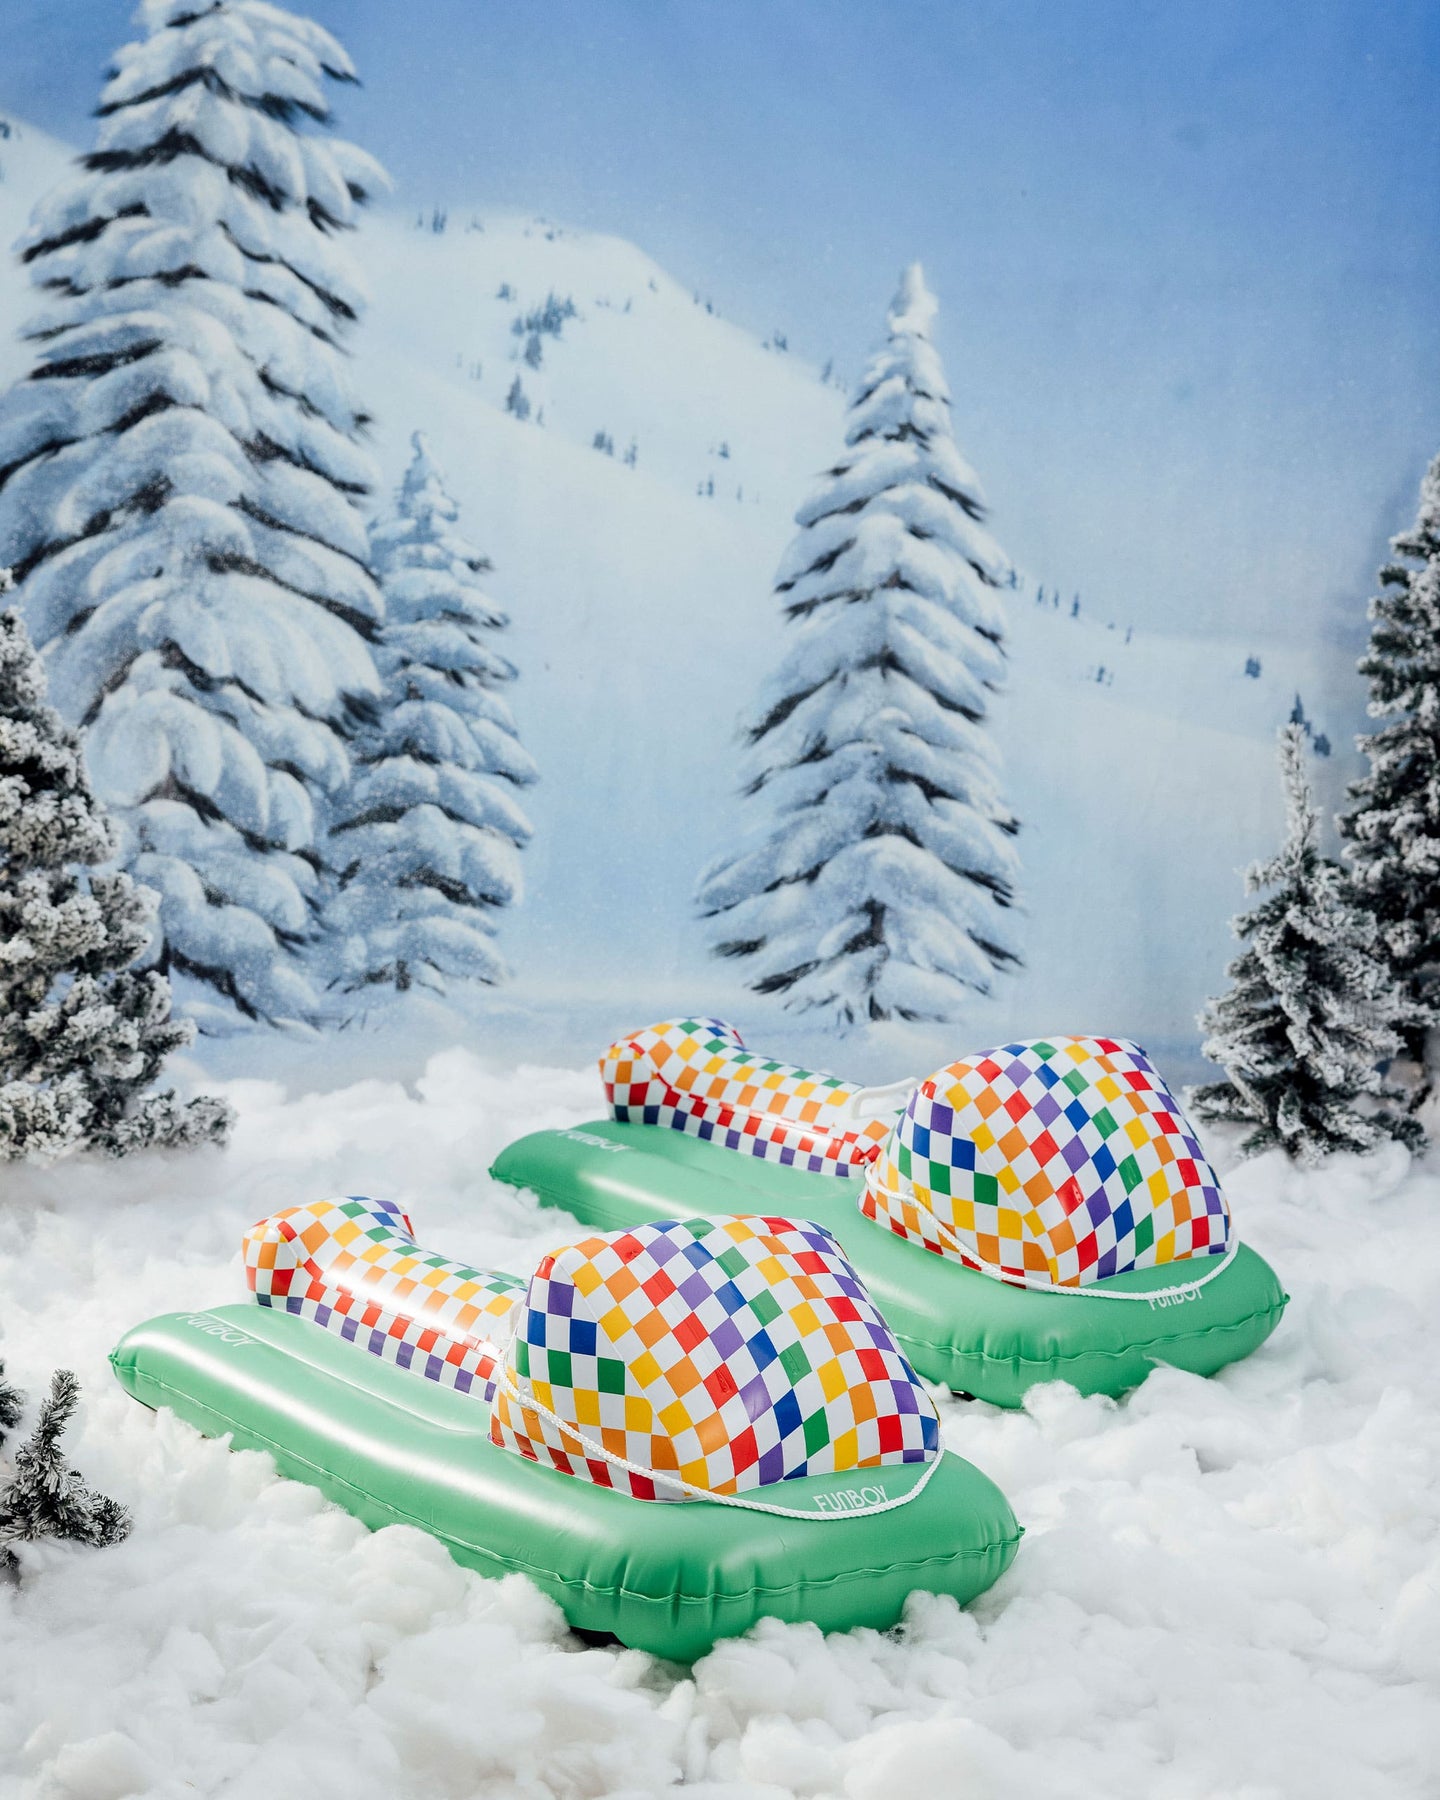 Kids Snow Sled - Rainbow Checked - 2 Pack